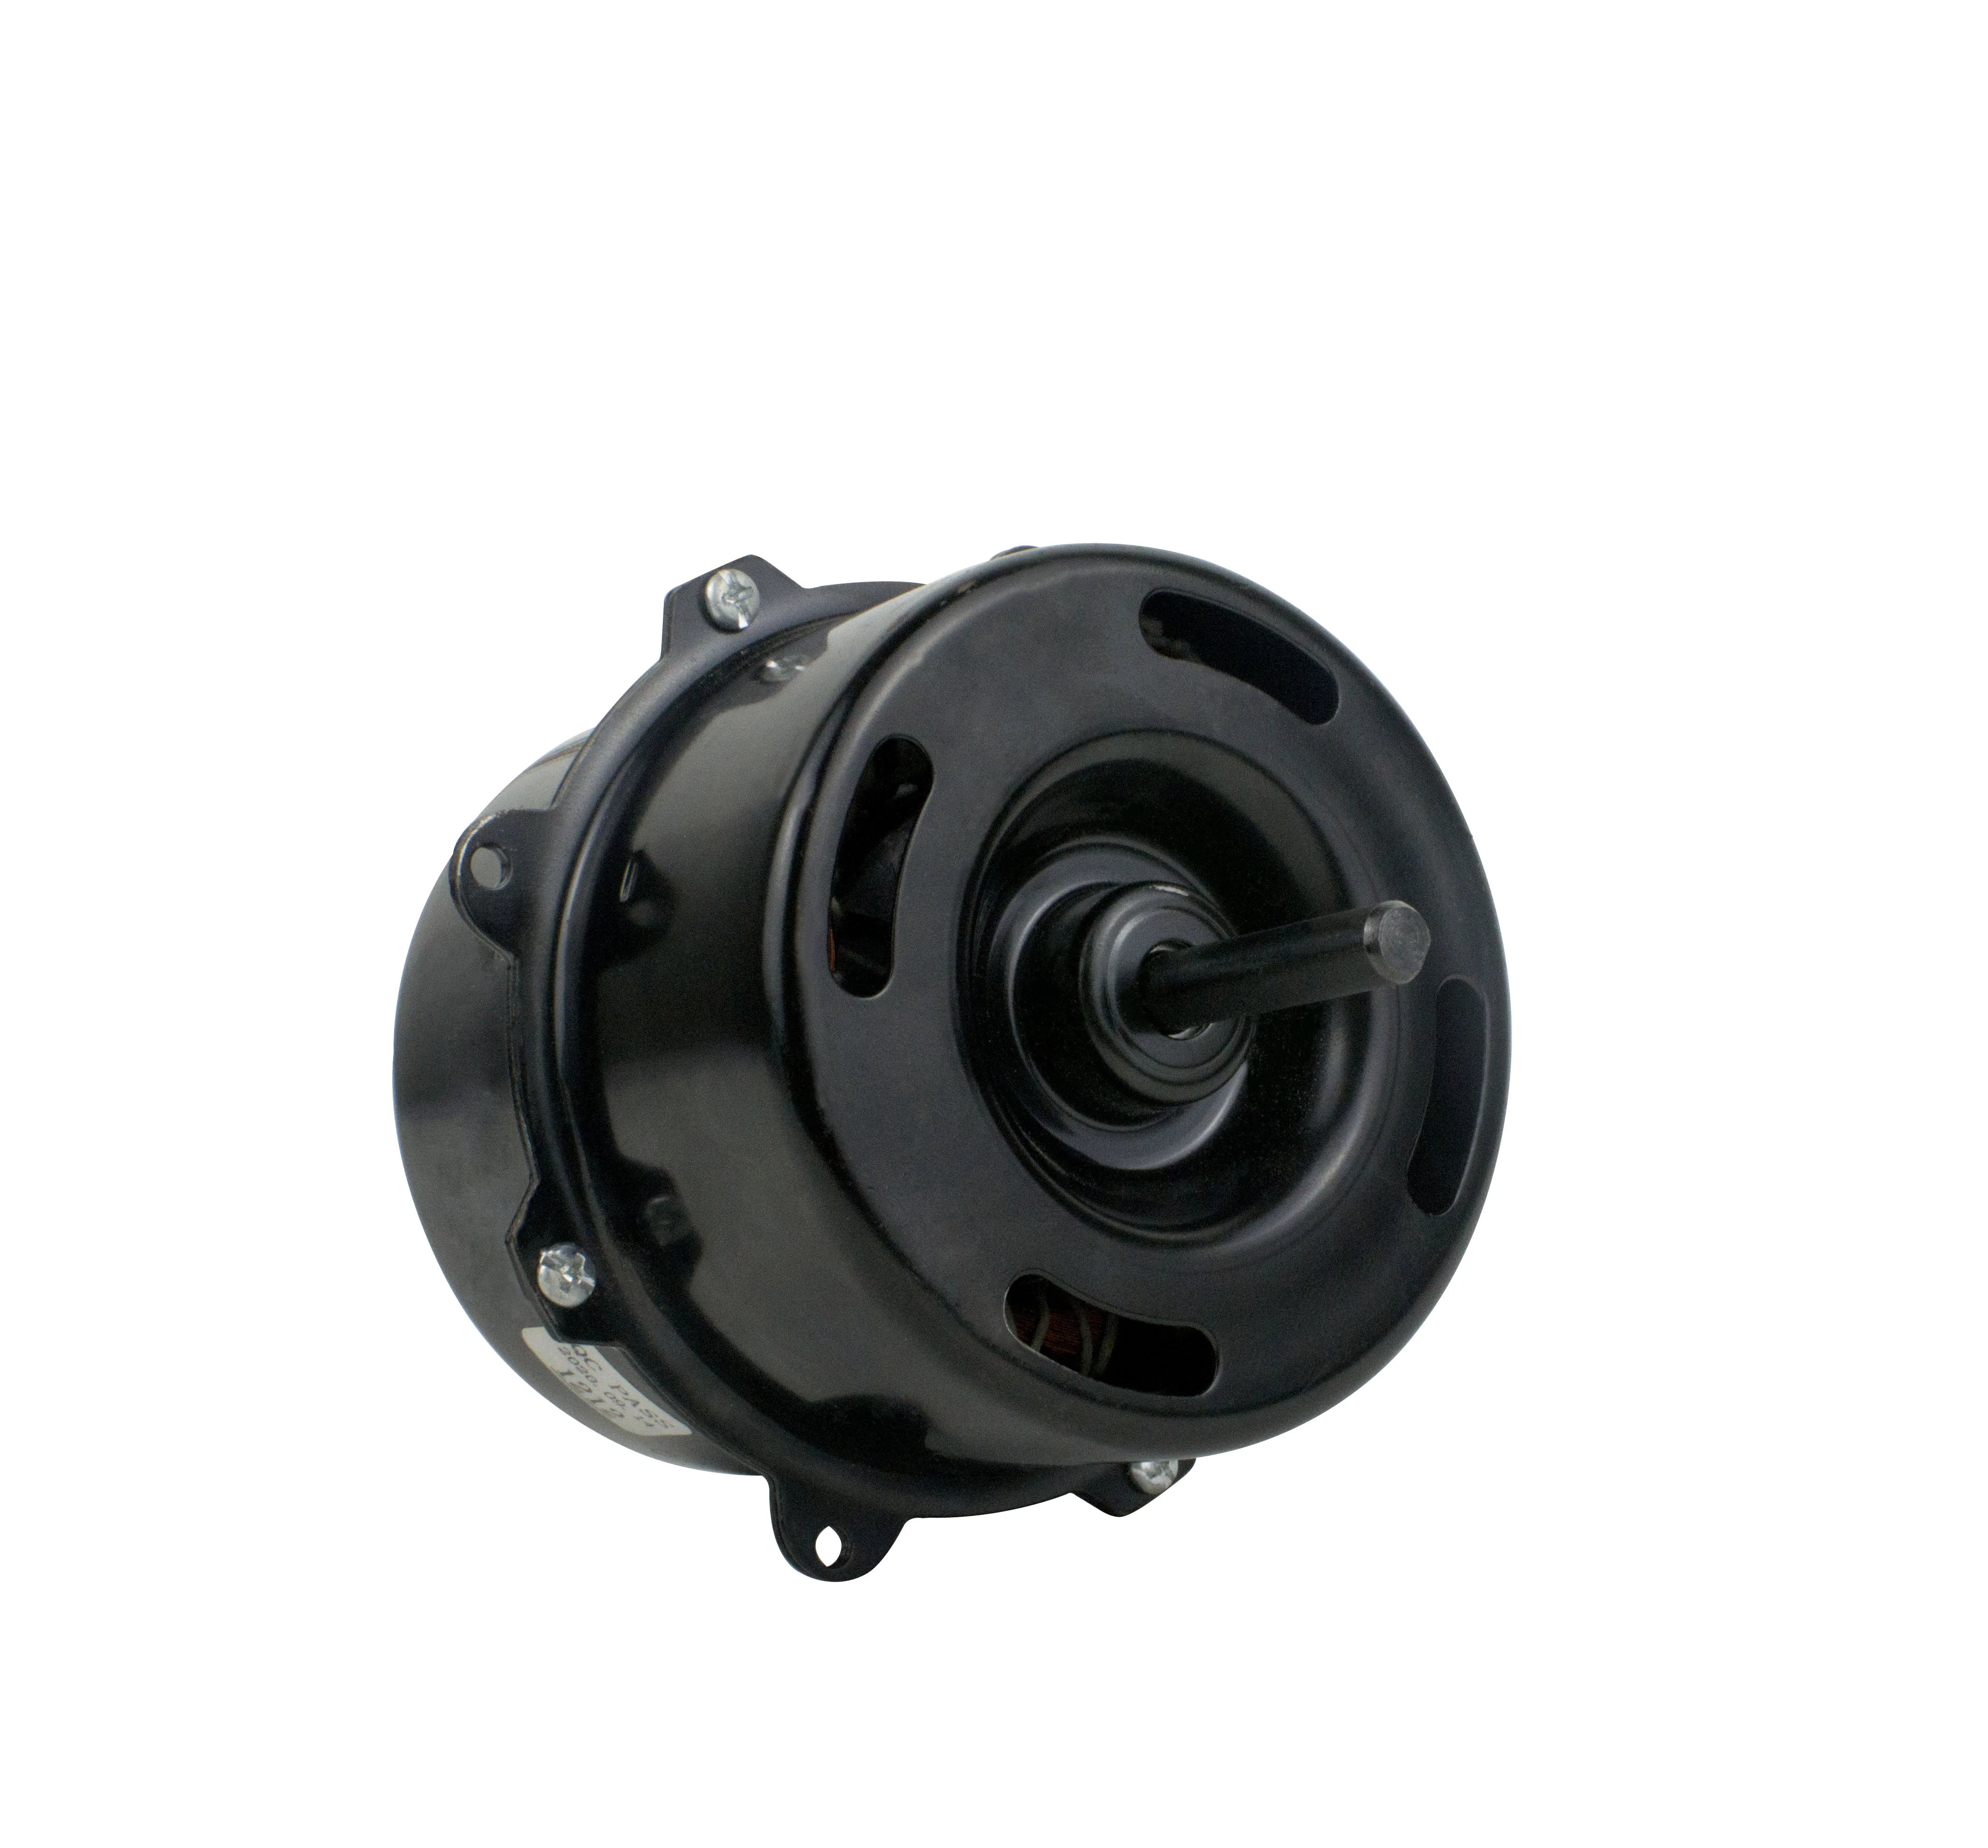 Factory high performance ventilation motor for greenhouse ac asynchronous motor single phase ac motor